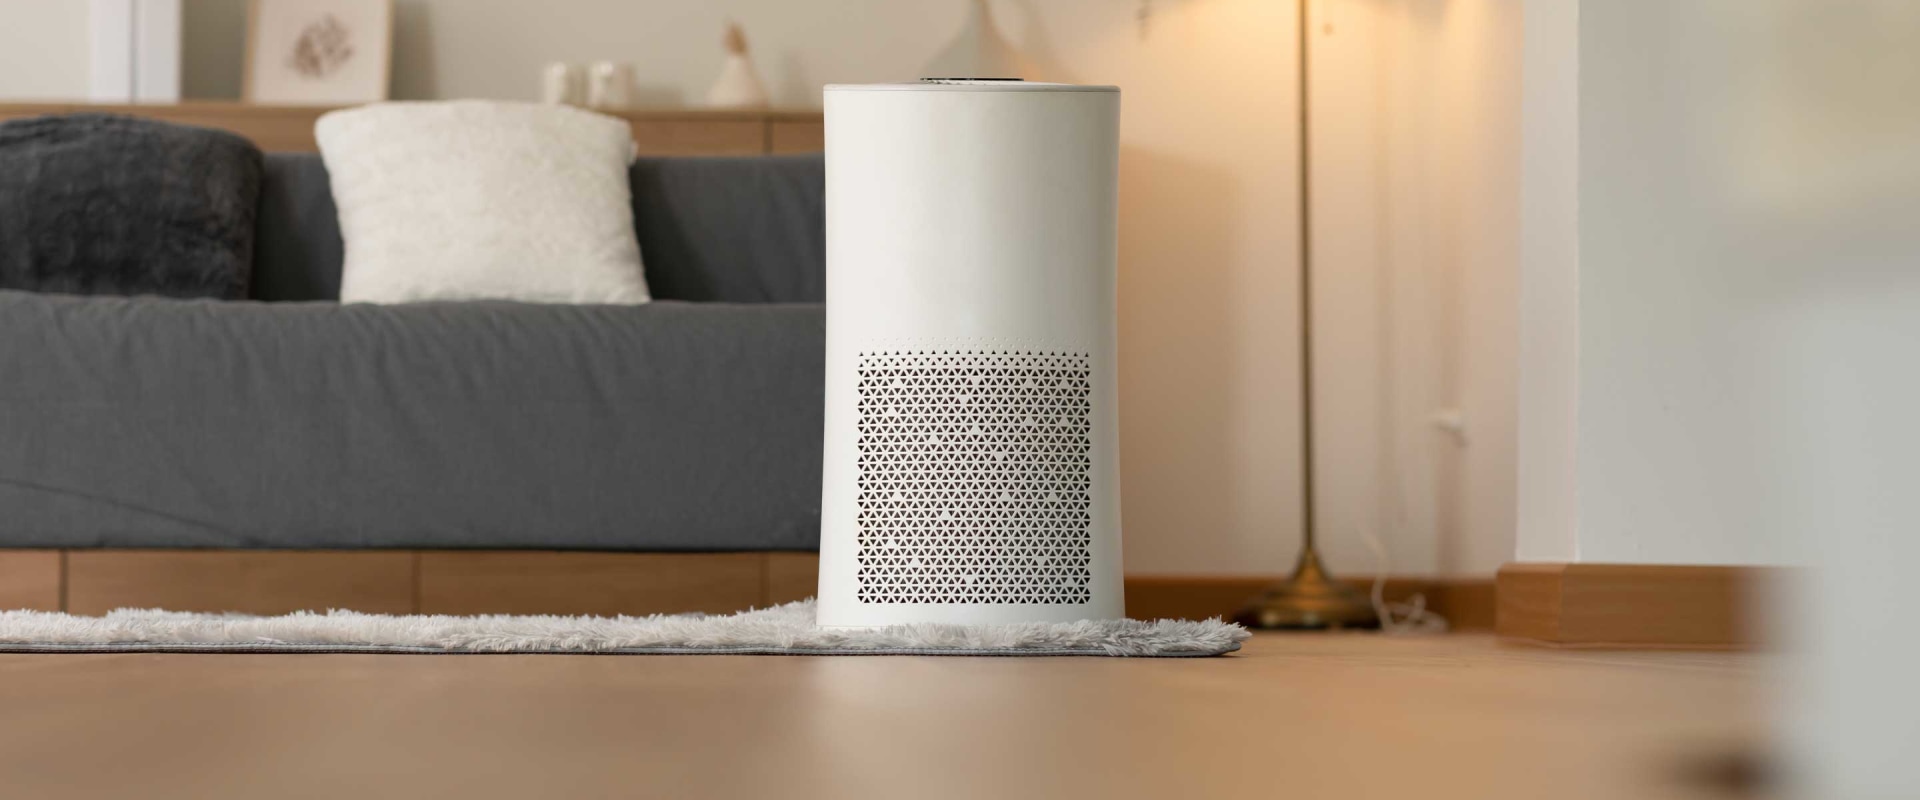 Should You Use an Air Purifier with an Ionizer? - A Comprehensive Guide